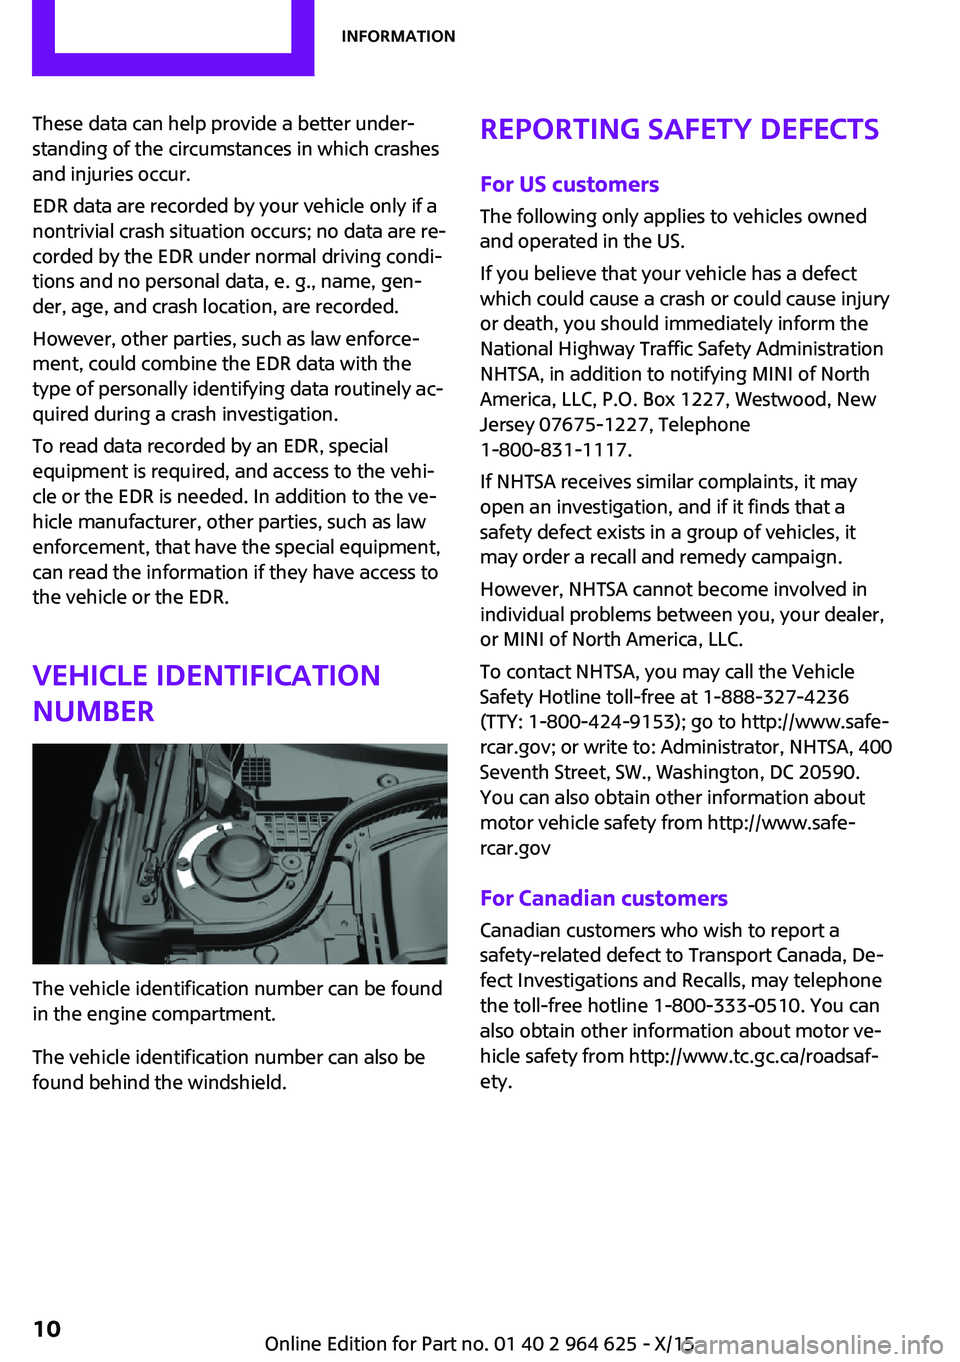 MINI COOPER 2015  Owners Manual These data can help provide a better under‐
standing of the circumstances in which crashes
and injuries occur.
EDR data are recorded by your vehicle only if a
nontrivial crash situation occurs; no d